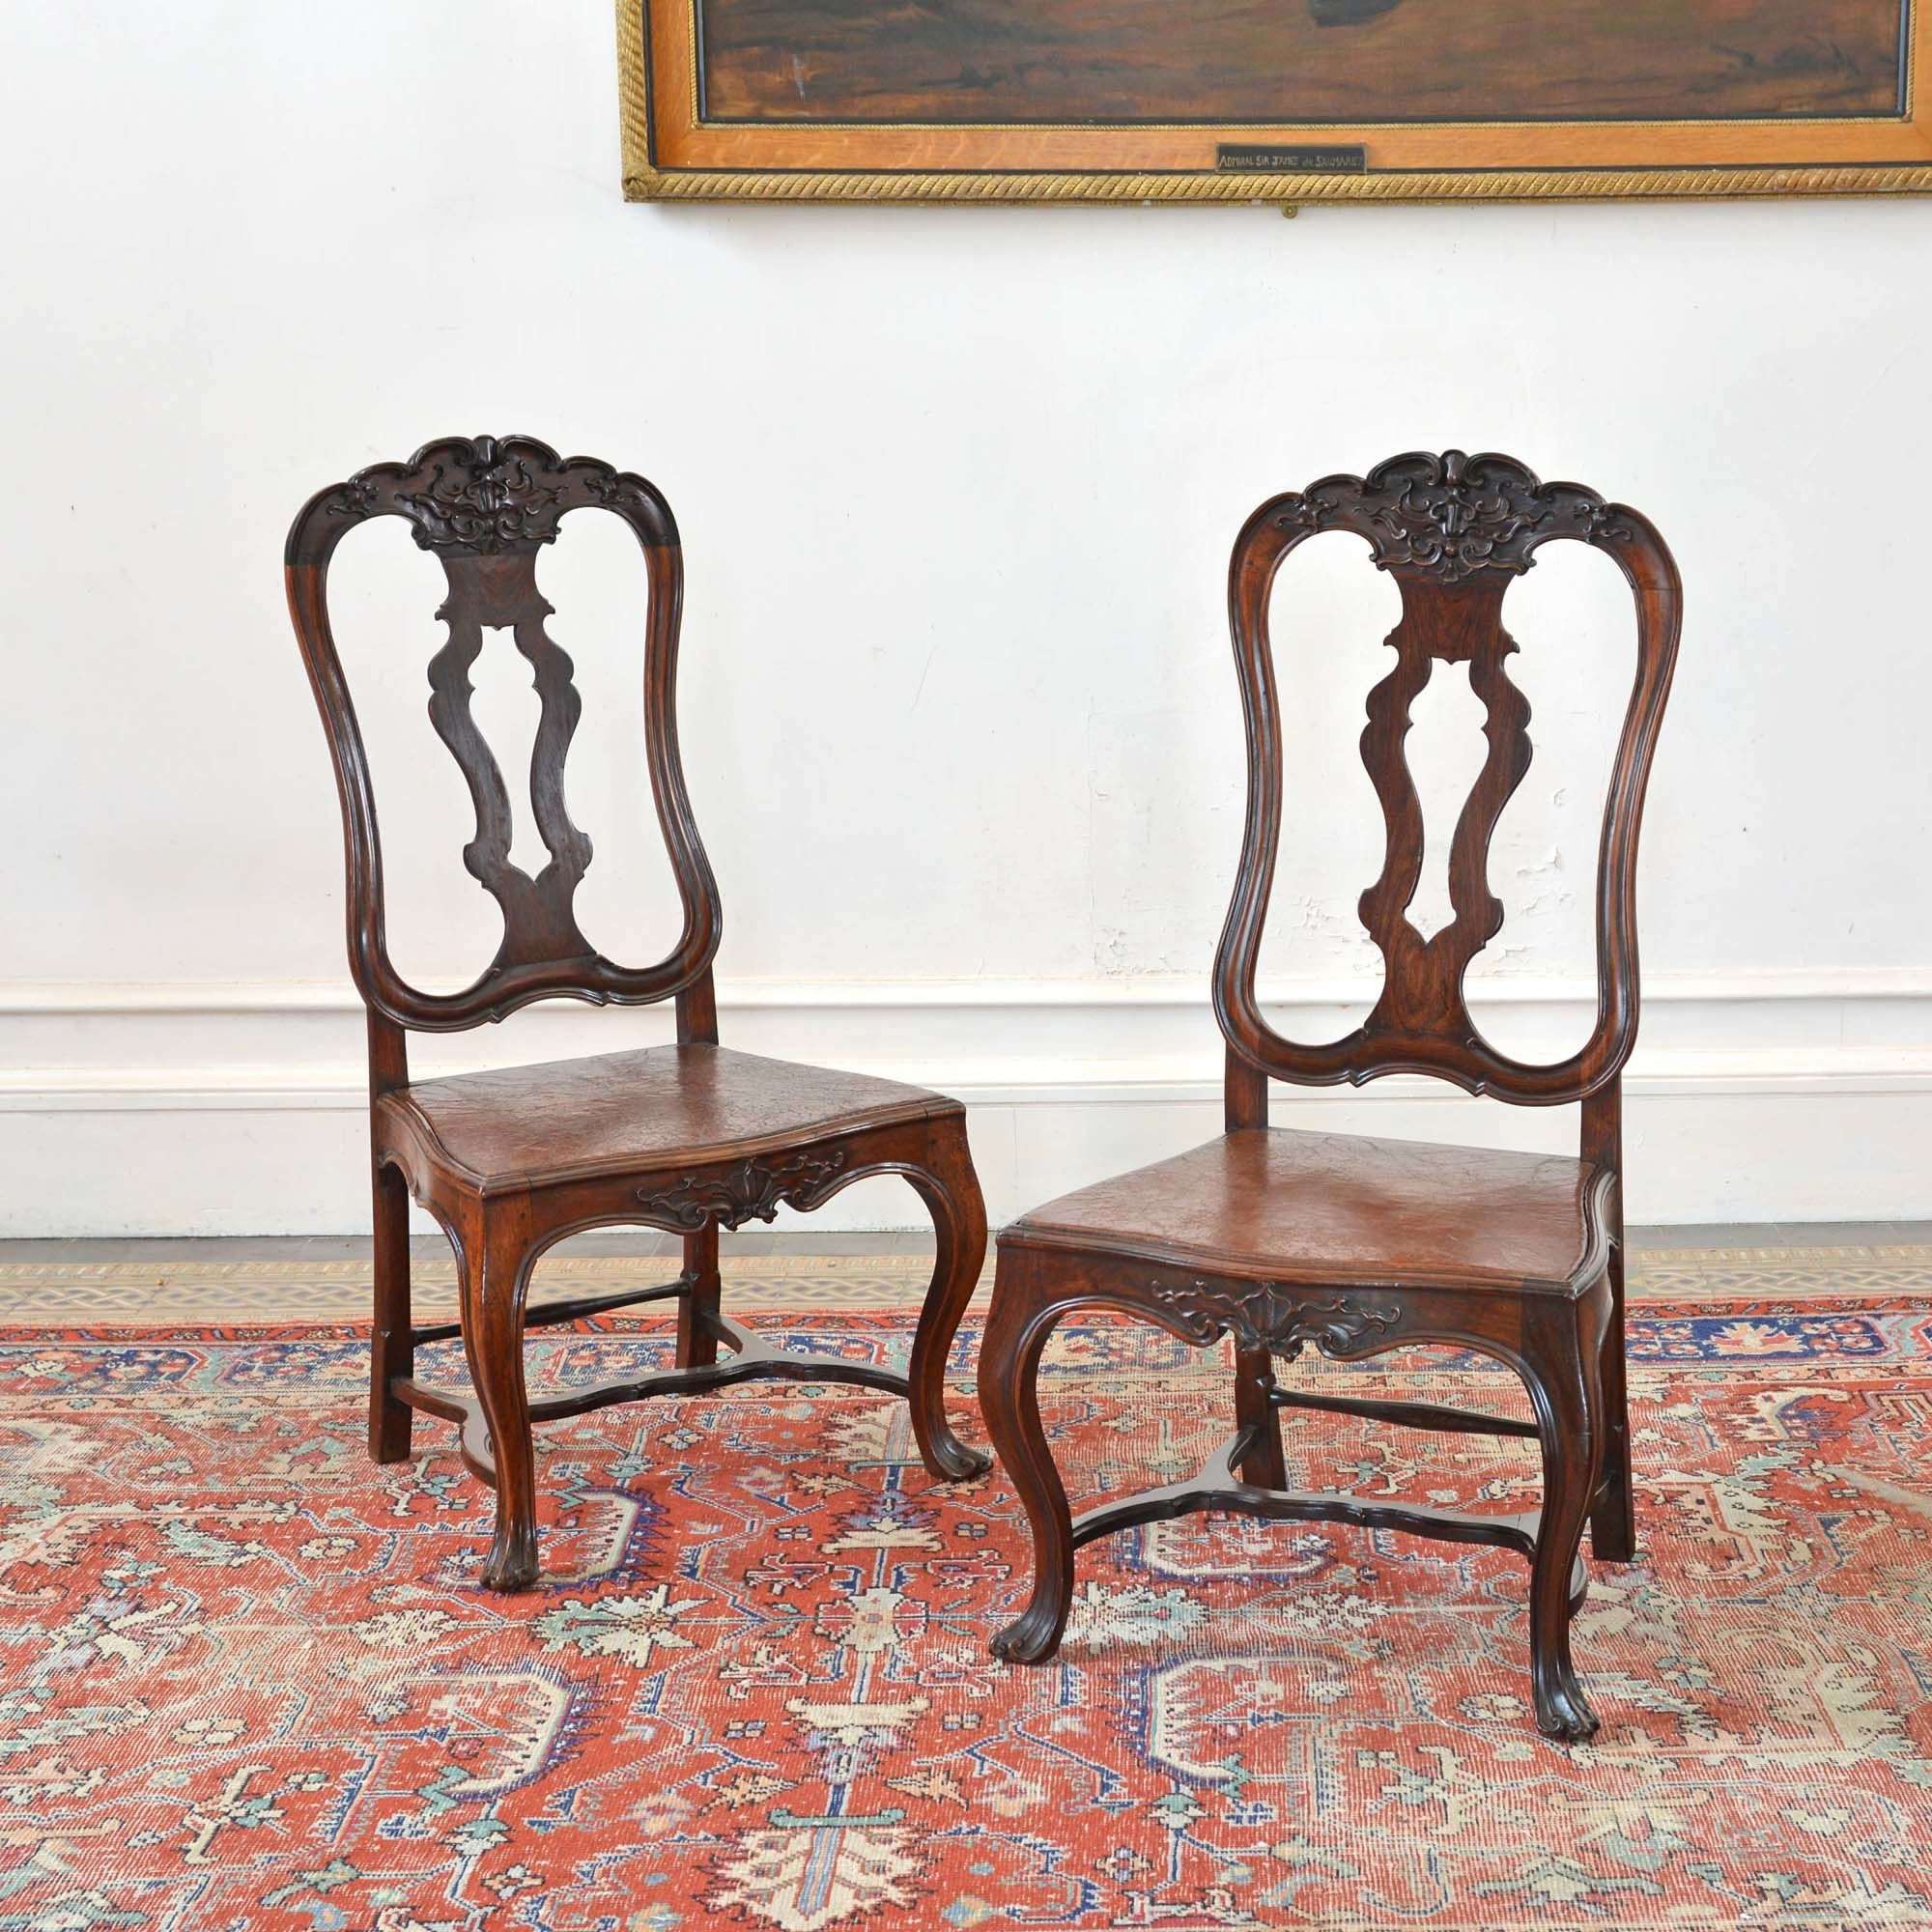 Pair 18th century Portuguese tall-back rosewood chairs